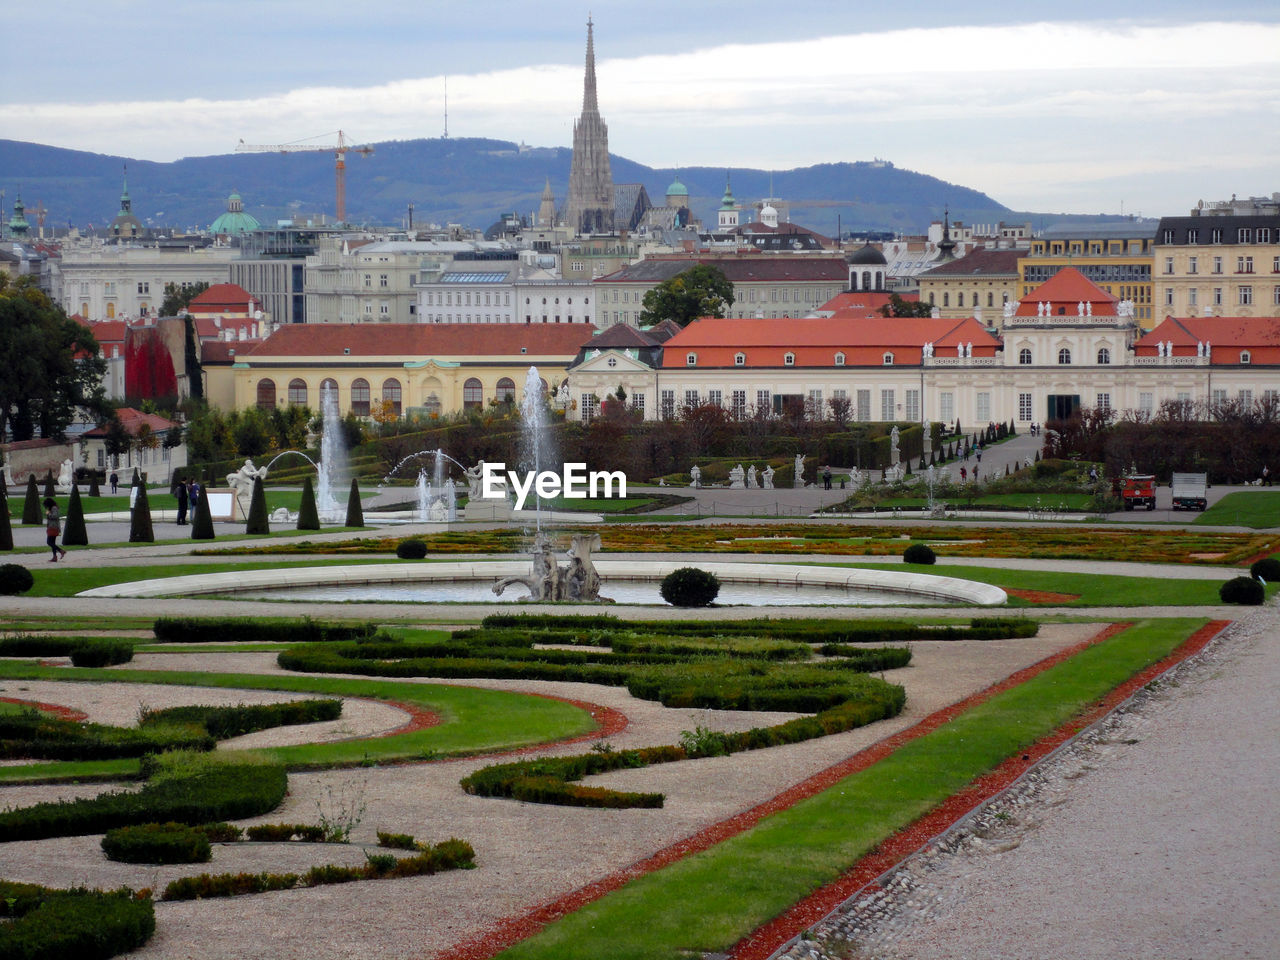 Garden of castle schönbrunn with the castle and the skyline of vienna in the background